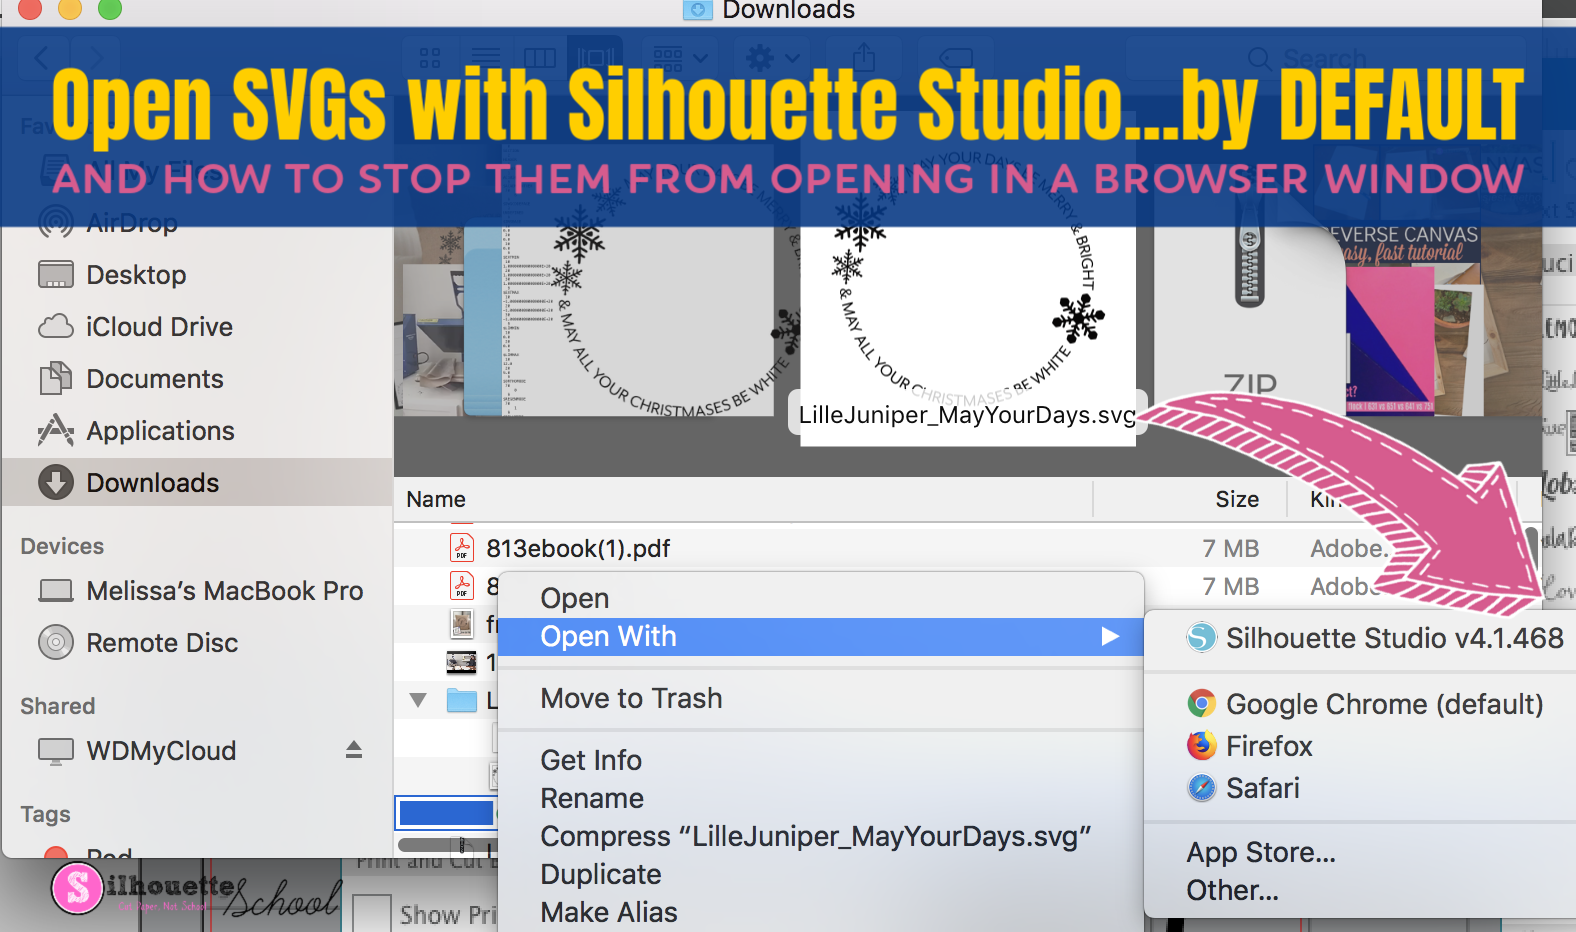 Download Open Svg Files By Default With Silhouette Studio Instead Of Your Internet Browser Silhouette School